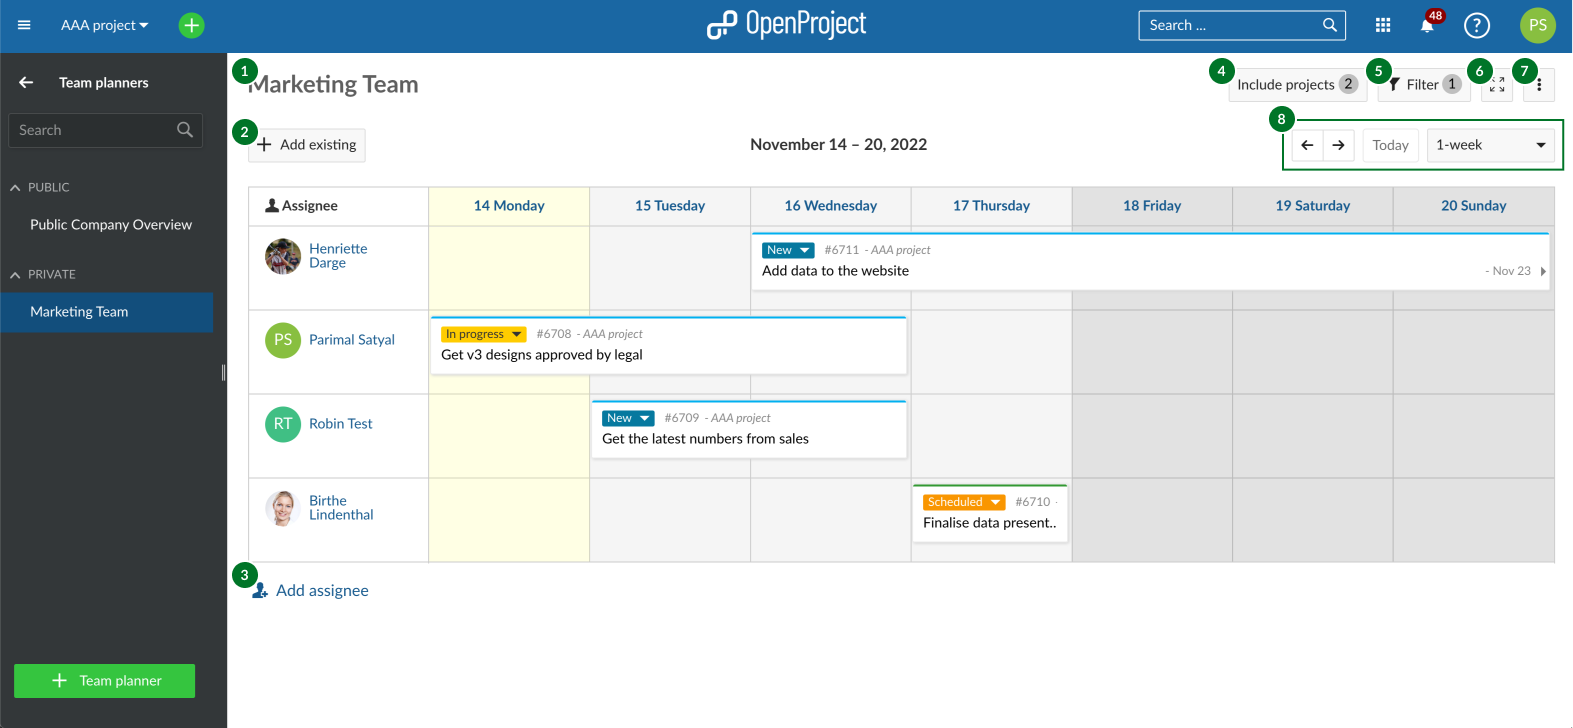 A screenshot of an example team planner with different functions highlighted